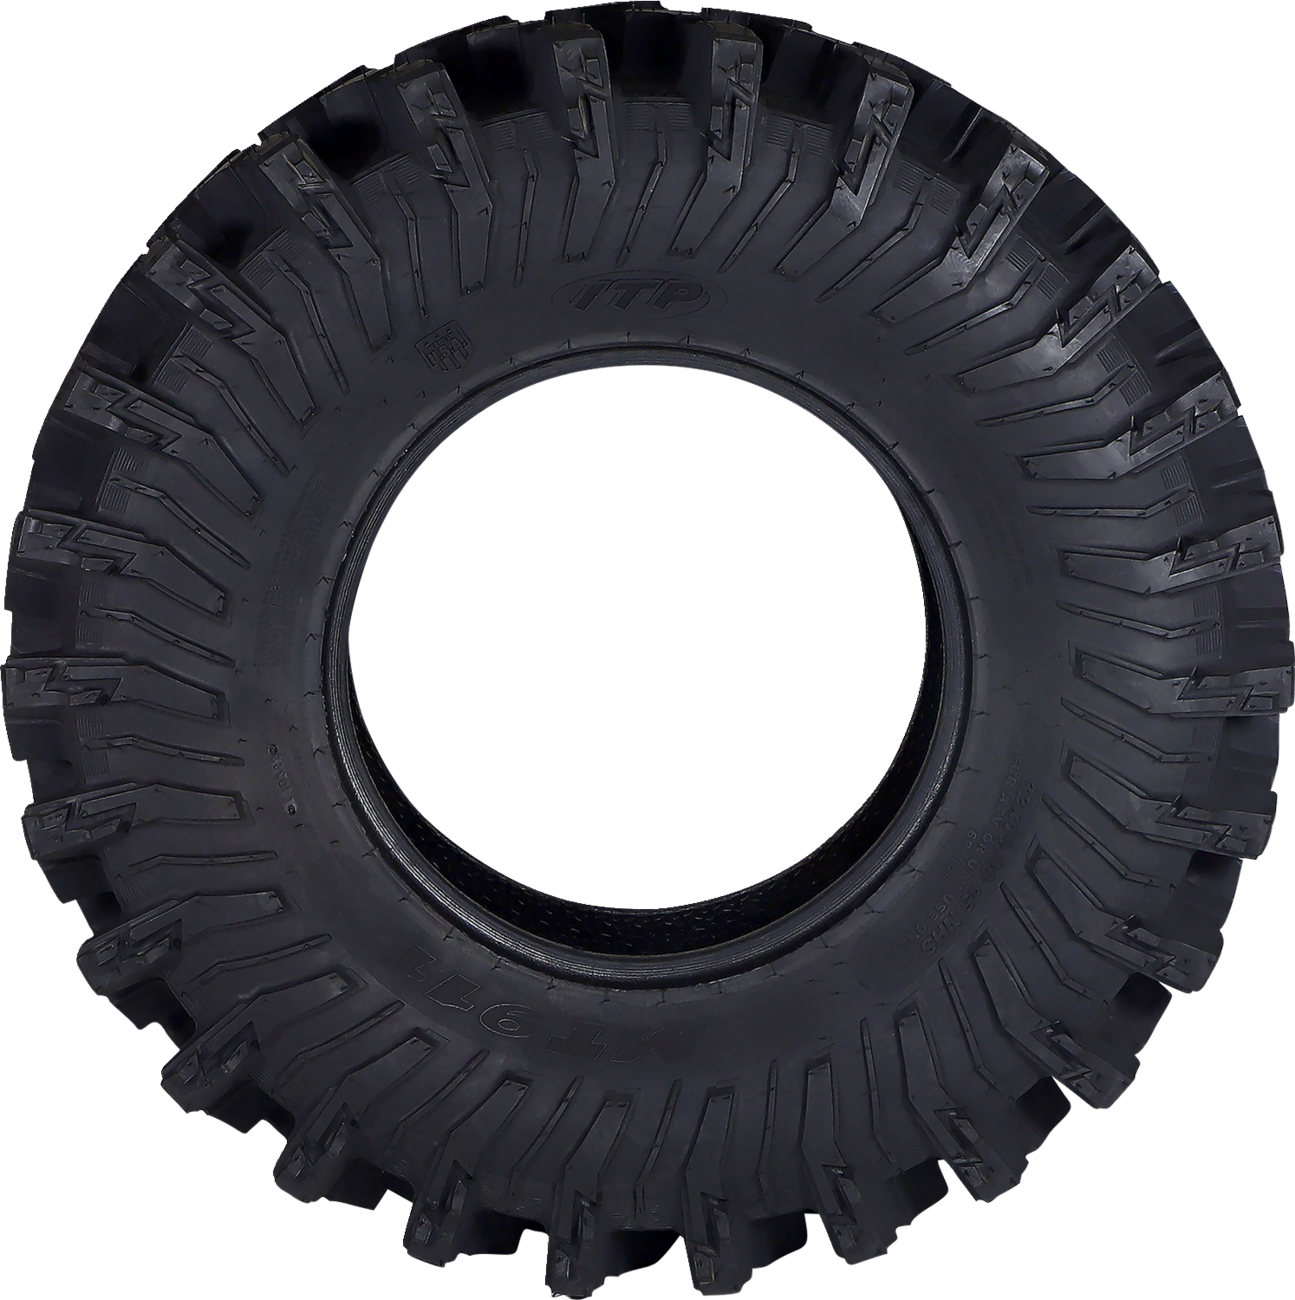 ITP Tire - MT911 - Front/Rear - 28x10-14 - 8 Ply 6P1949